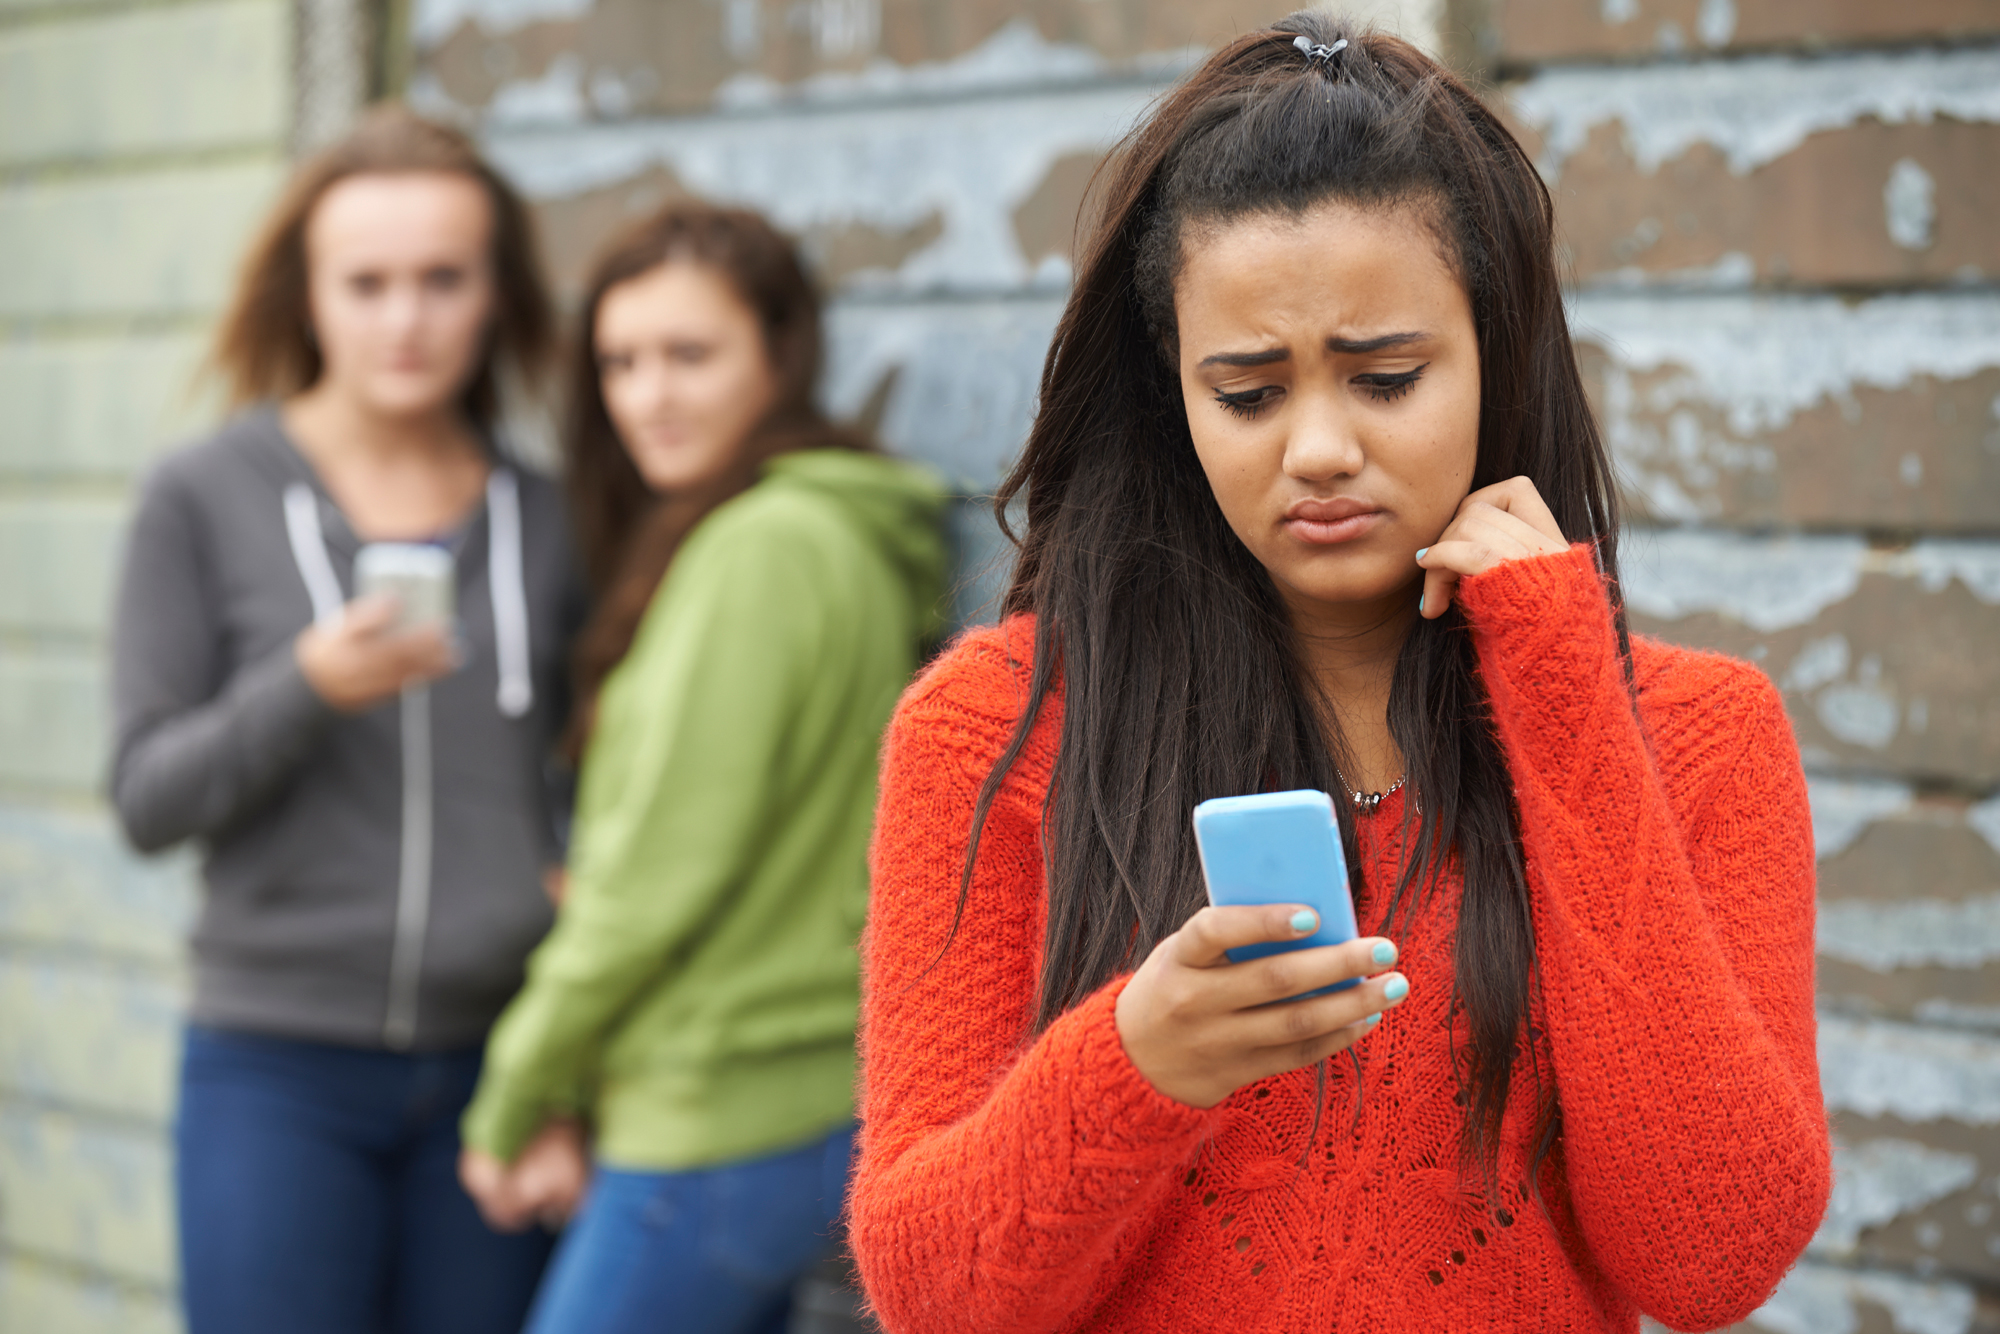 Teenage Girl Being Bullied via Text Message